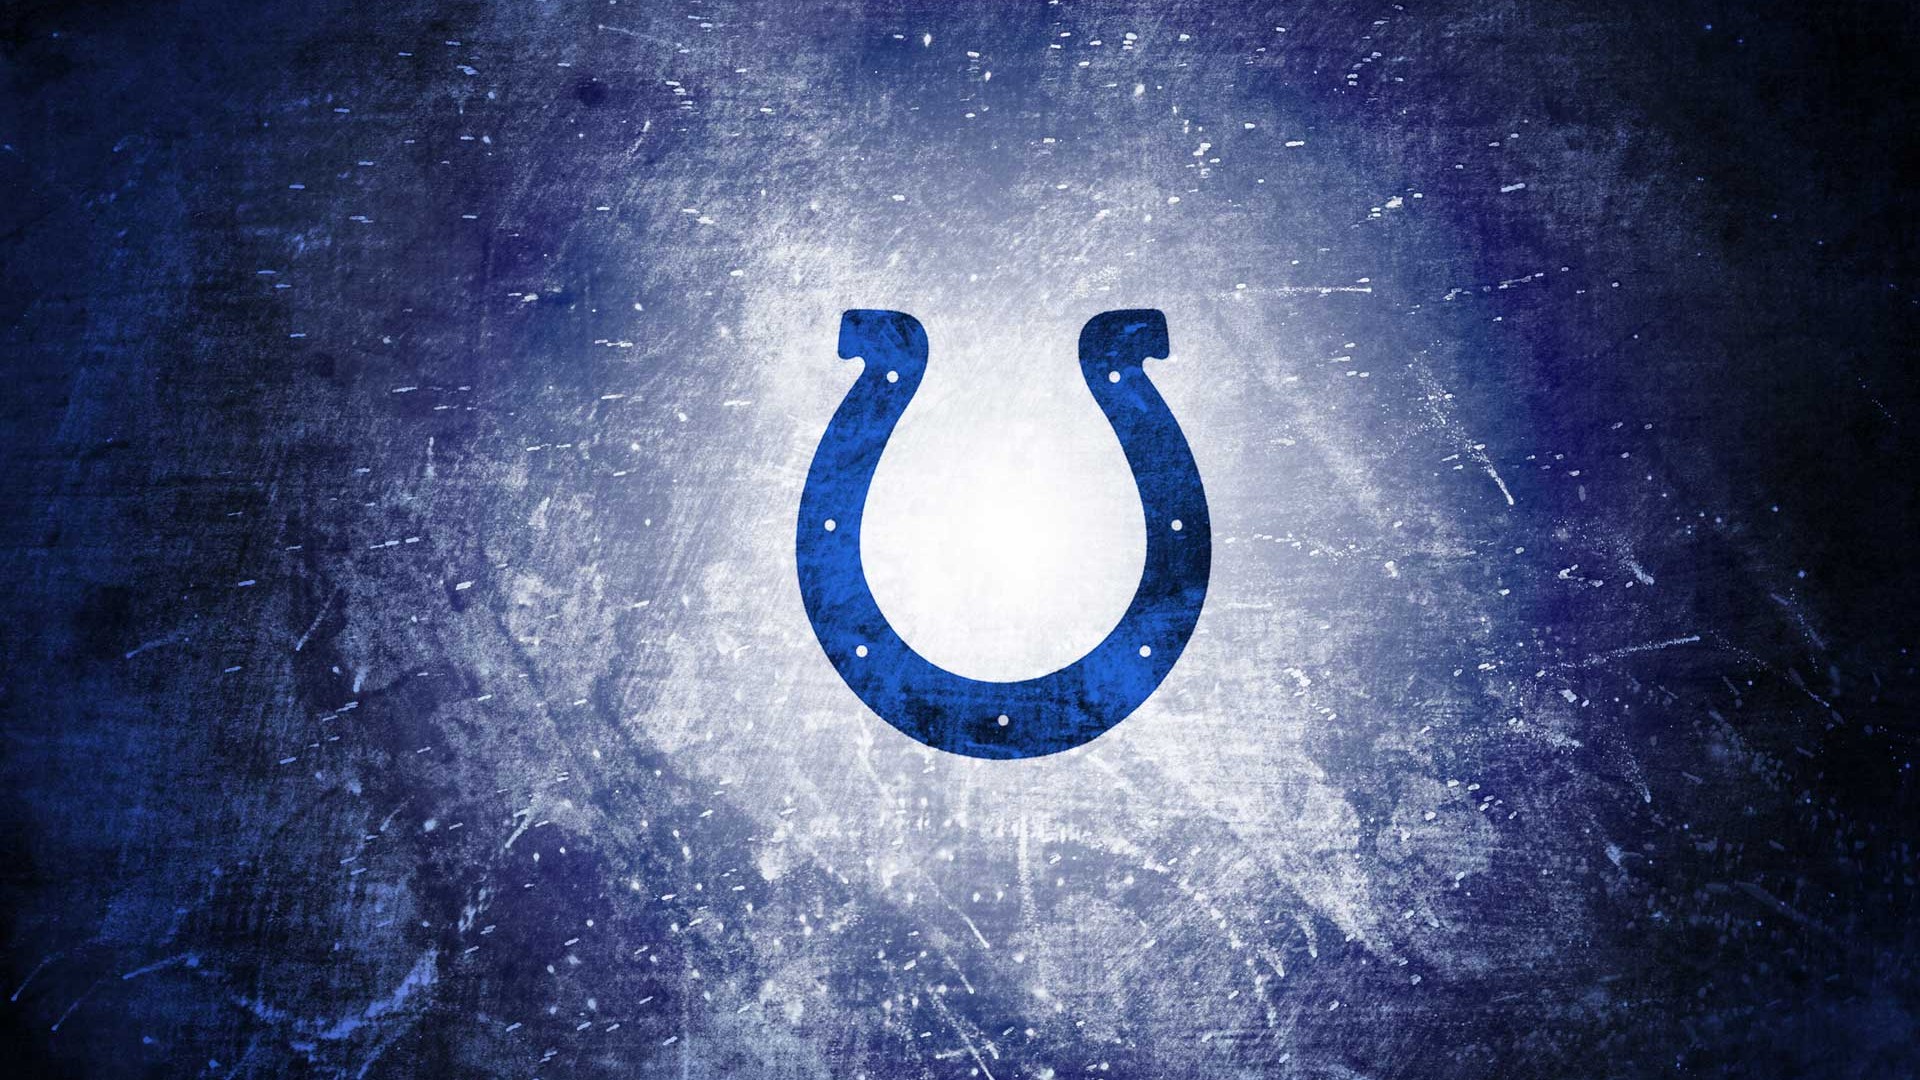 Indianapolis Colts Wallpaper For Mac Background Nfl